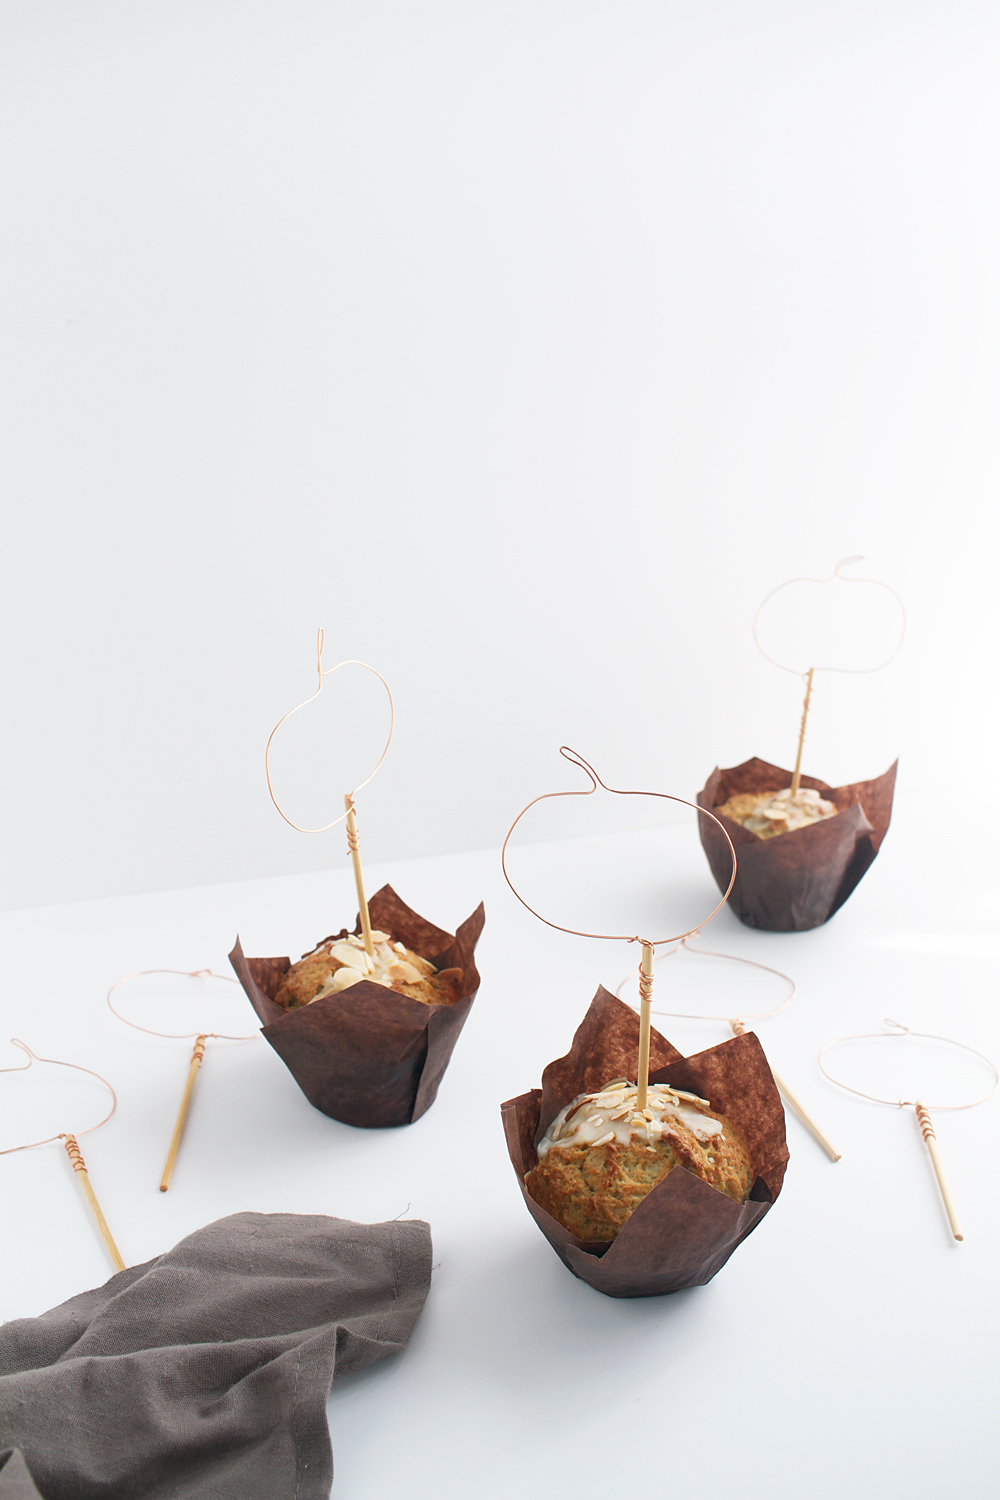 These DIY Wire Pumpkin Cupcake Toppers come together fast in just 4 steps with 2 materials, so you can get back to what's important: eating cupcakes.